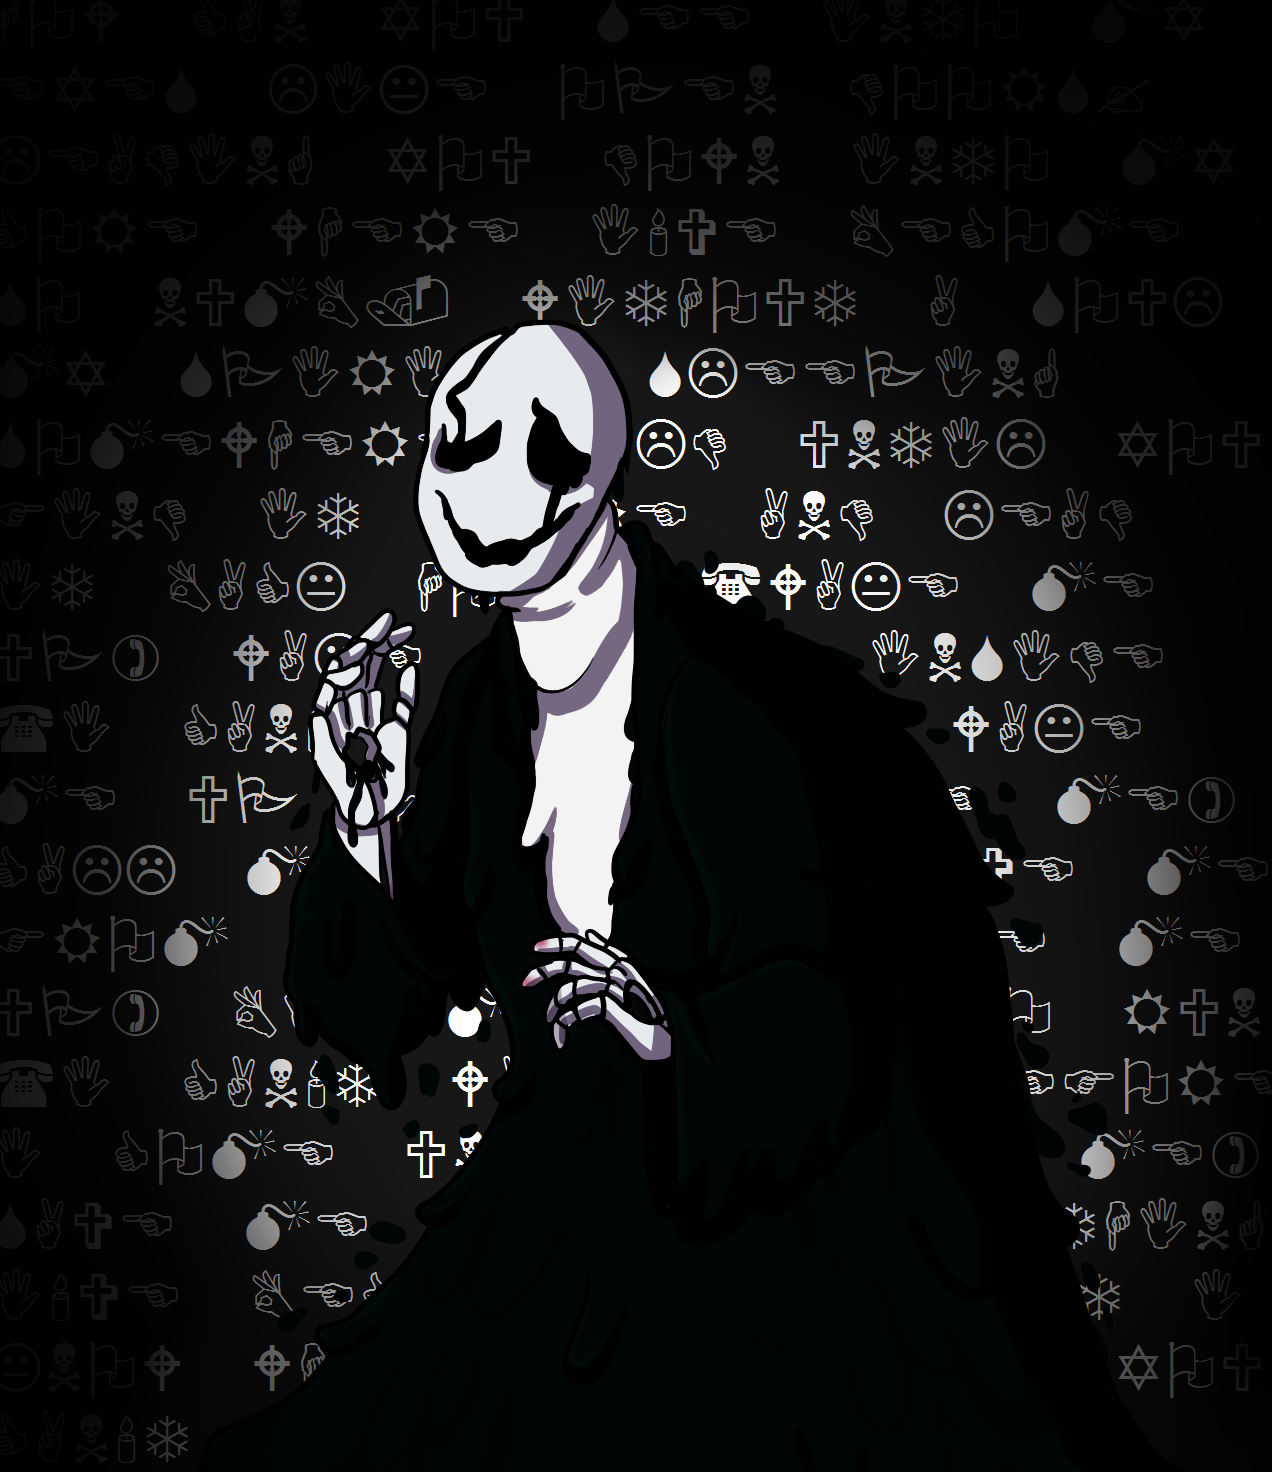 I see so much Gaster fan-art daily that now I can... - ʕノ•ᴥ•ʔノ ︵ ┻━┻